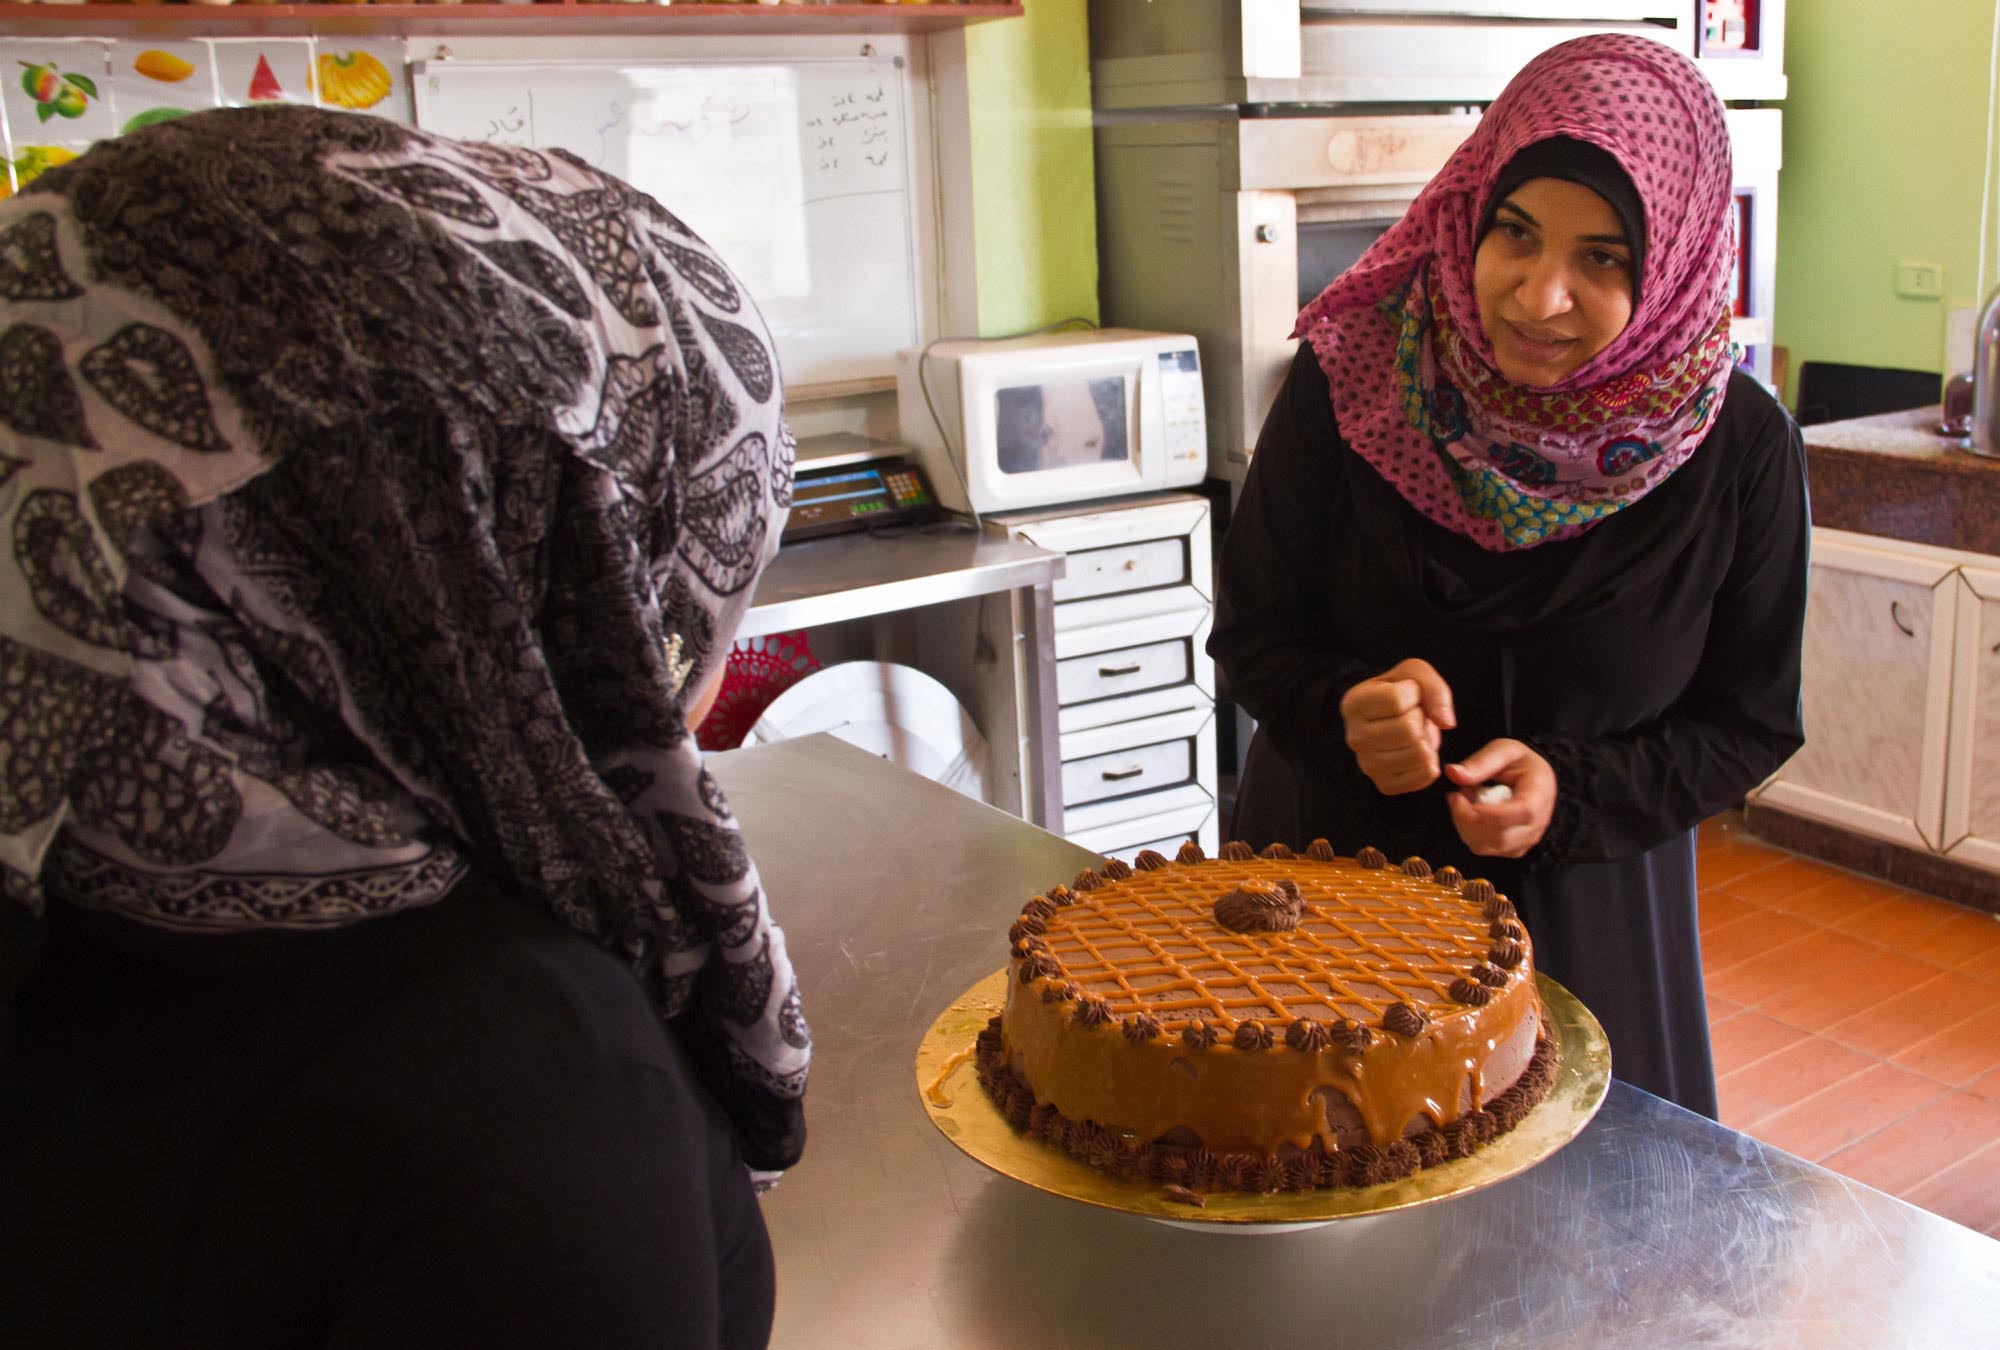 Pastry students work on a cake at the Women’s Program Center in Nahr El Bared.